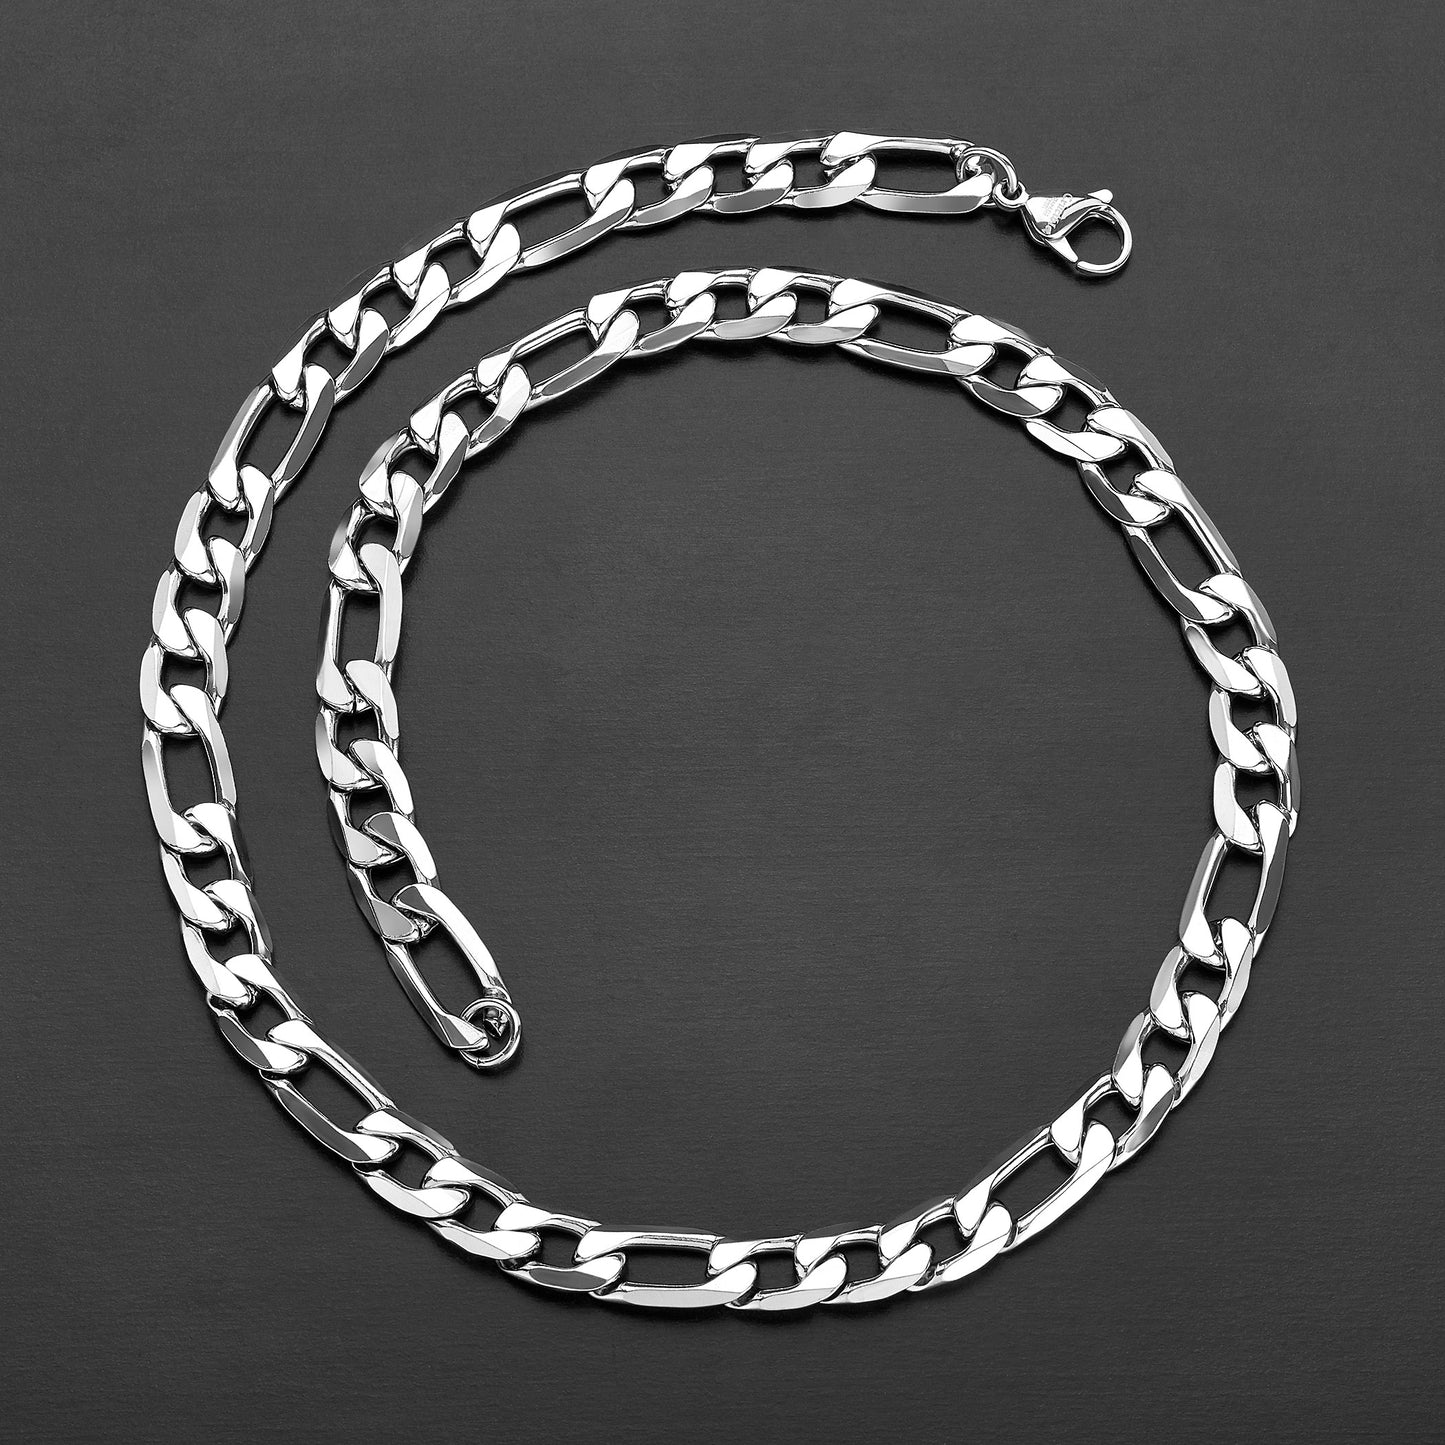 Men's Polished Beveled Figaro Chain Stainless Steel Necklace (12mm) - 24"